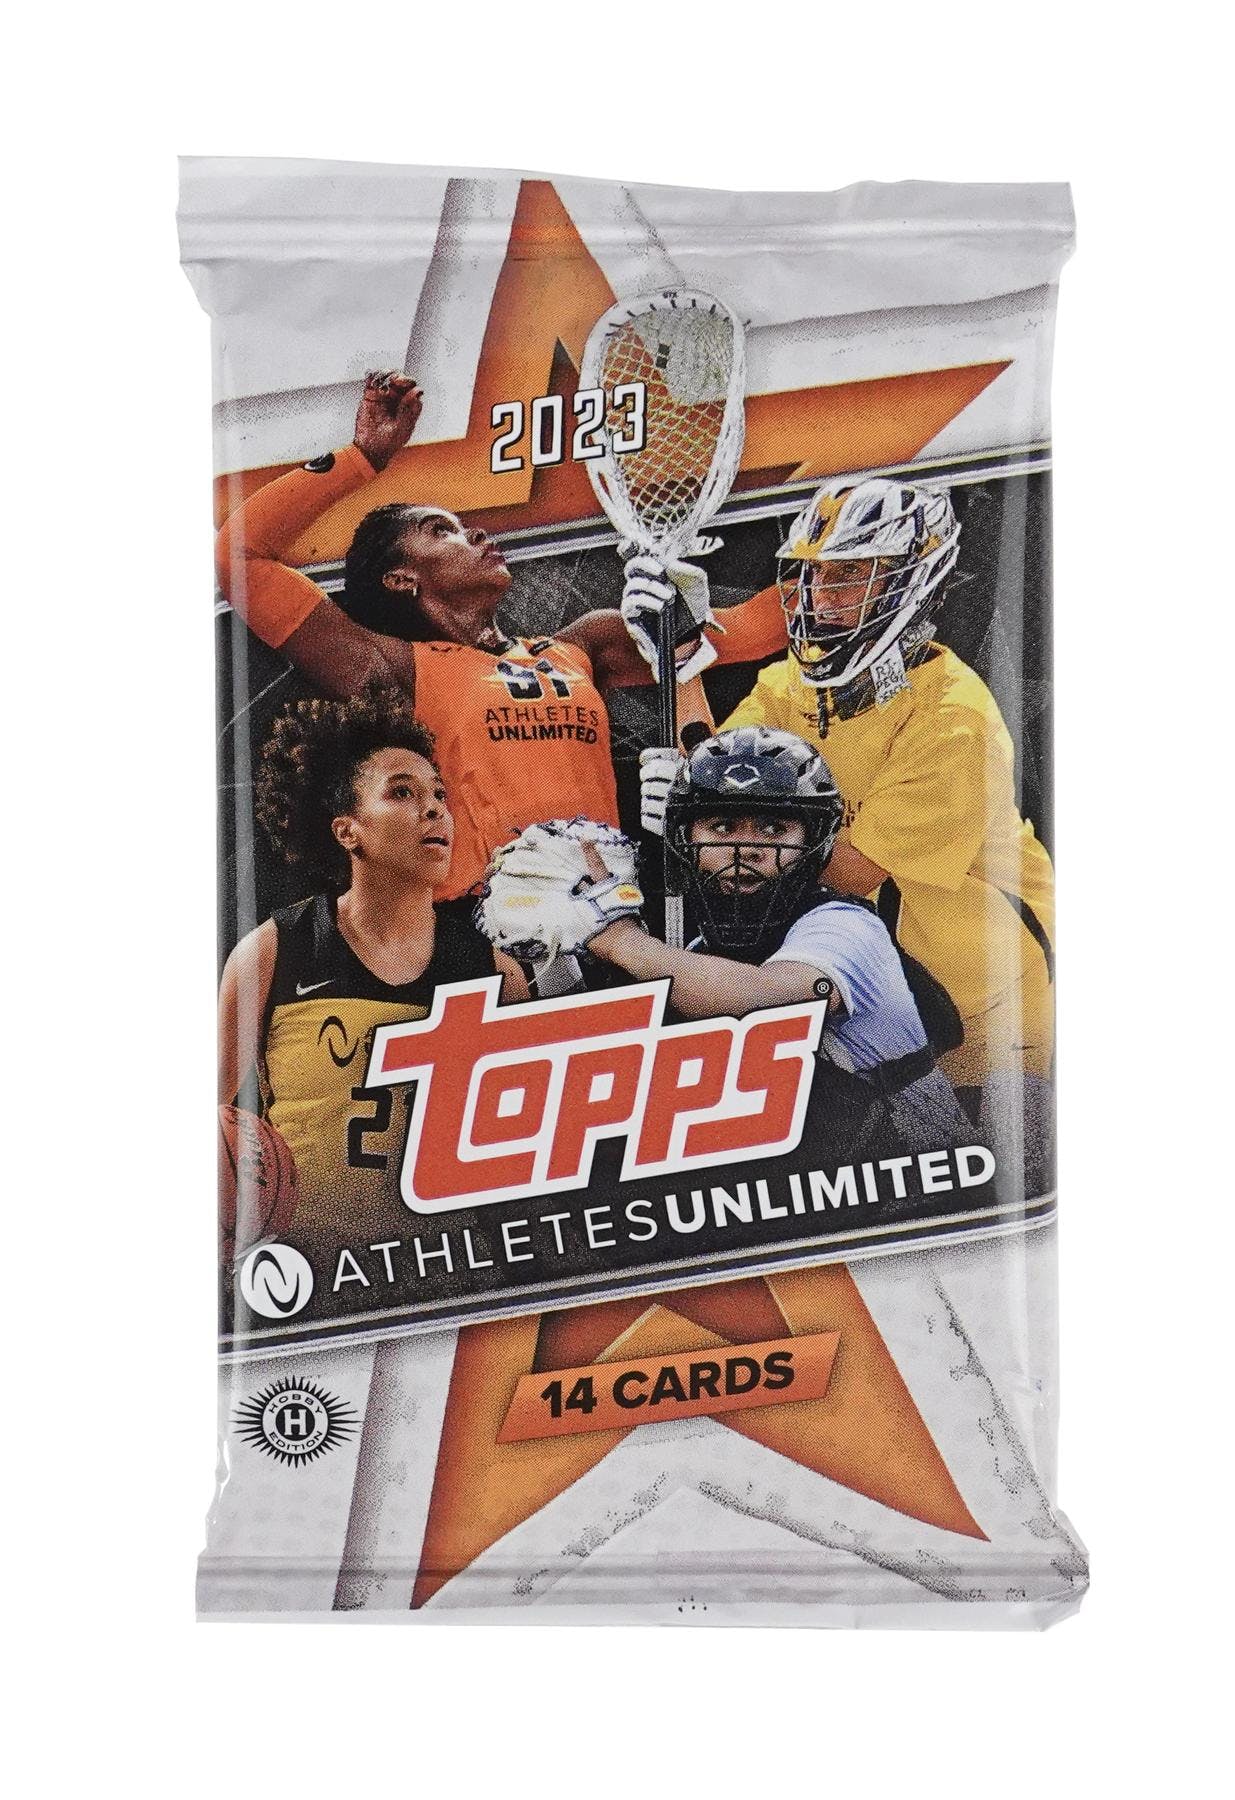 2023 Topps Athletes Unlimited Hobby Pack | Eastridge Sports Cards